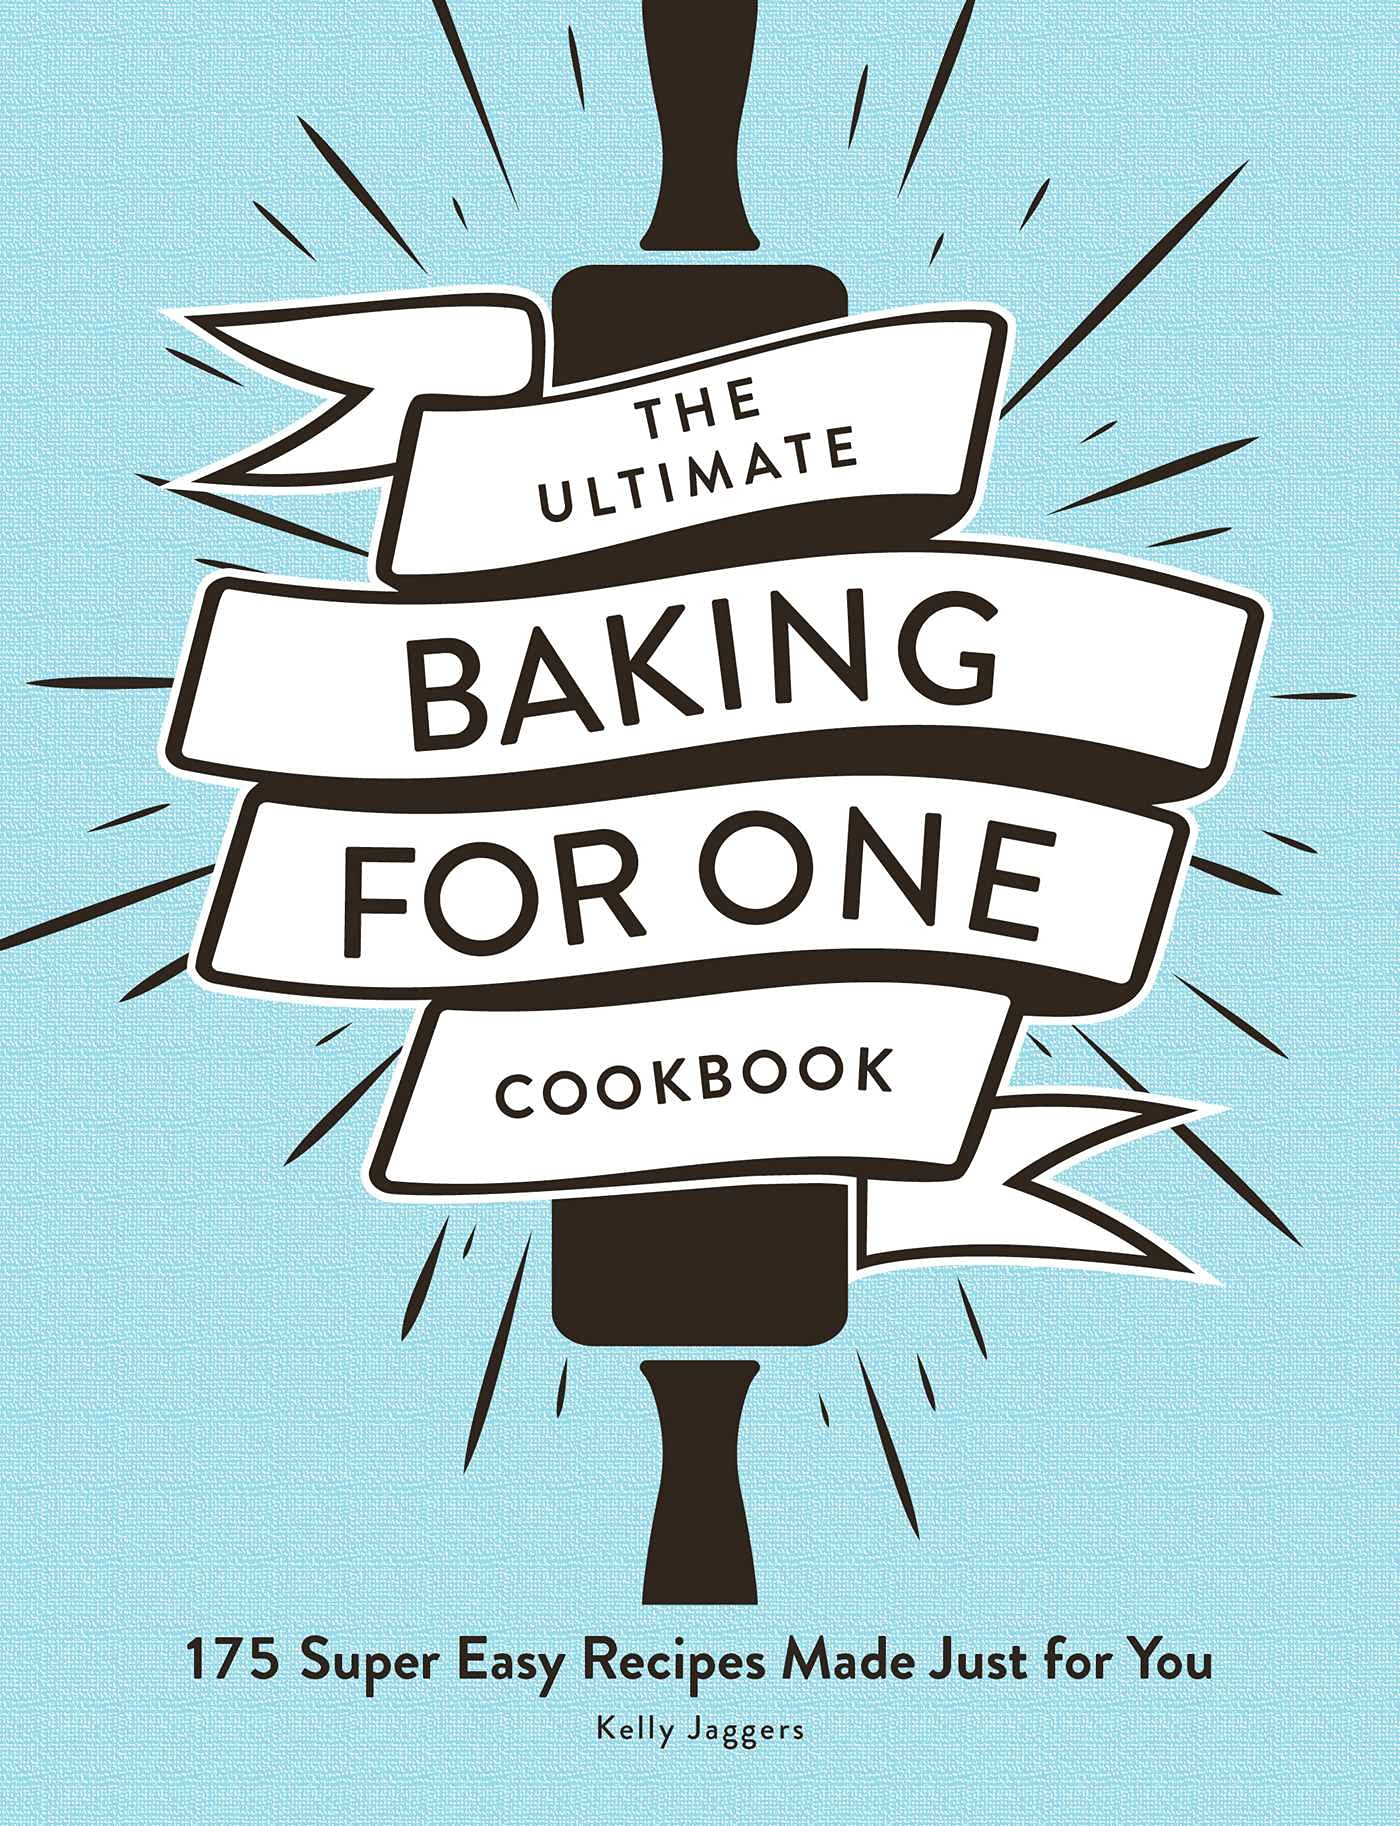 ~The Ultimate Baking For One Cookbook!